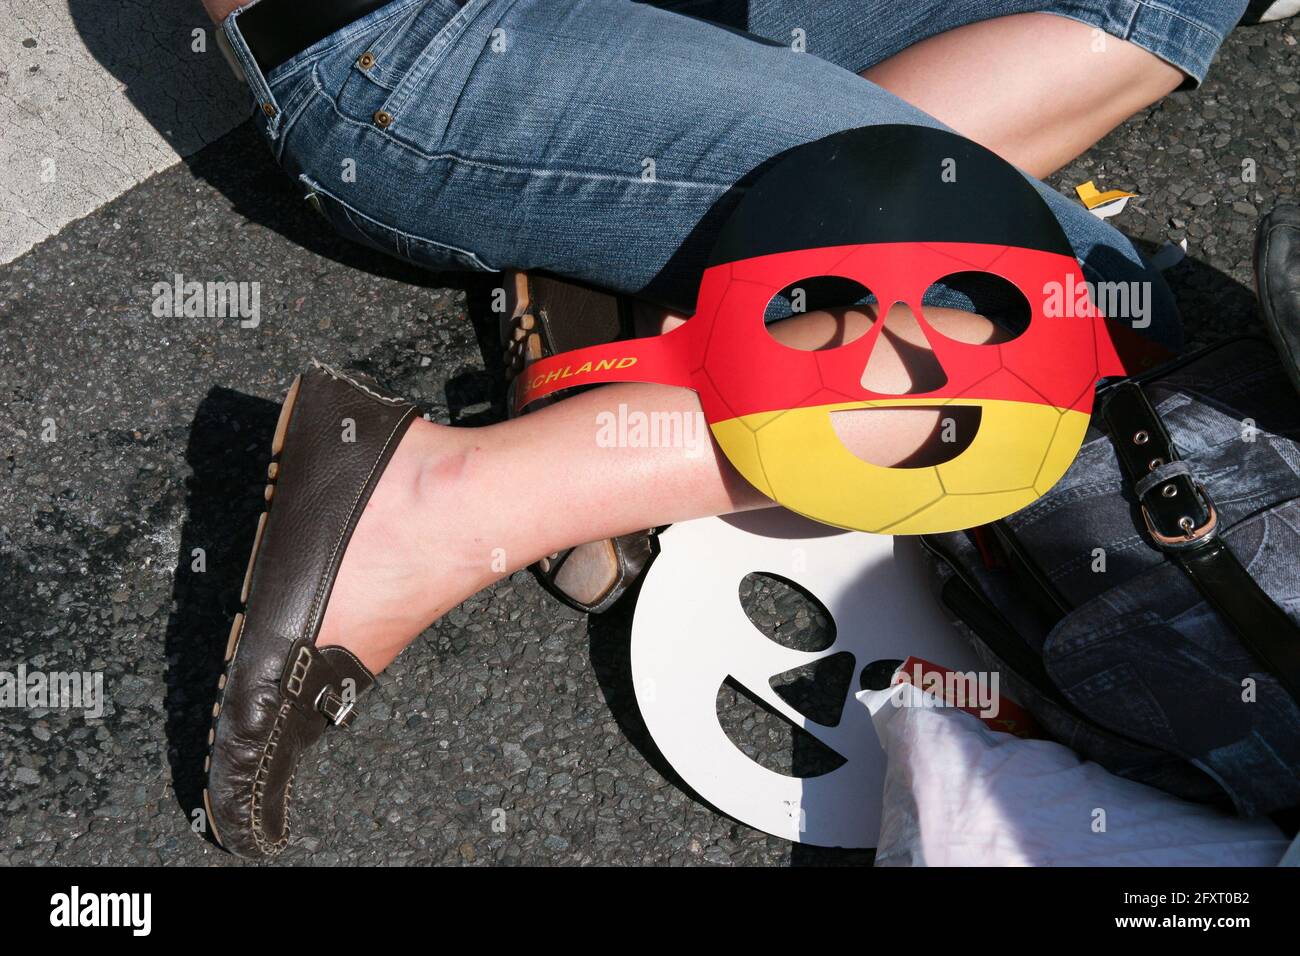 A face mask in black, red and gold lies on the knee of a participant who is sitting on the floor. Stock Photo